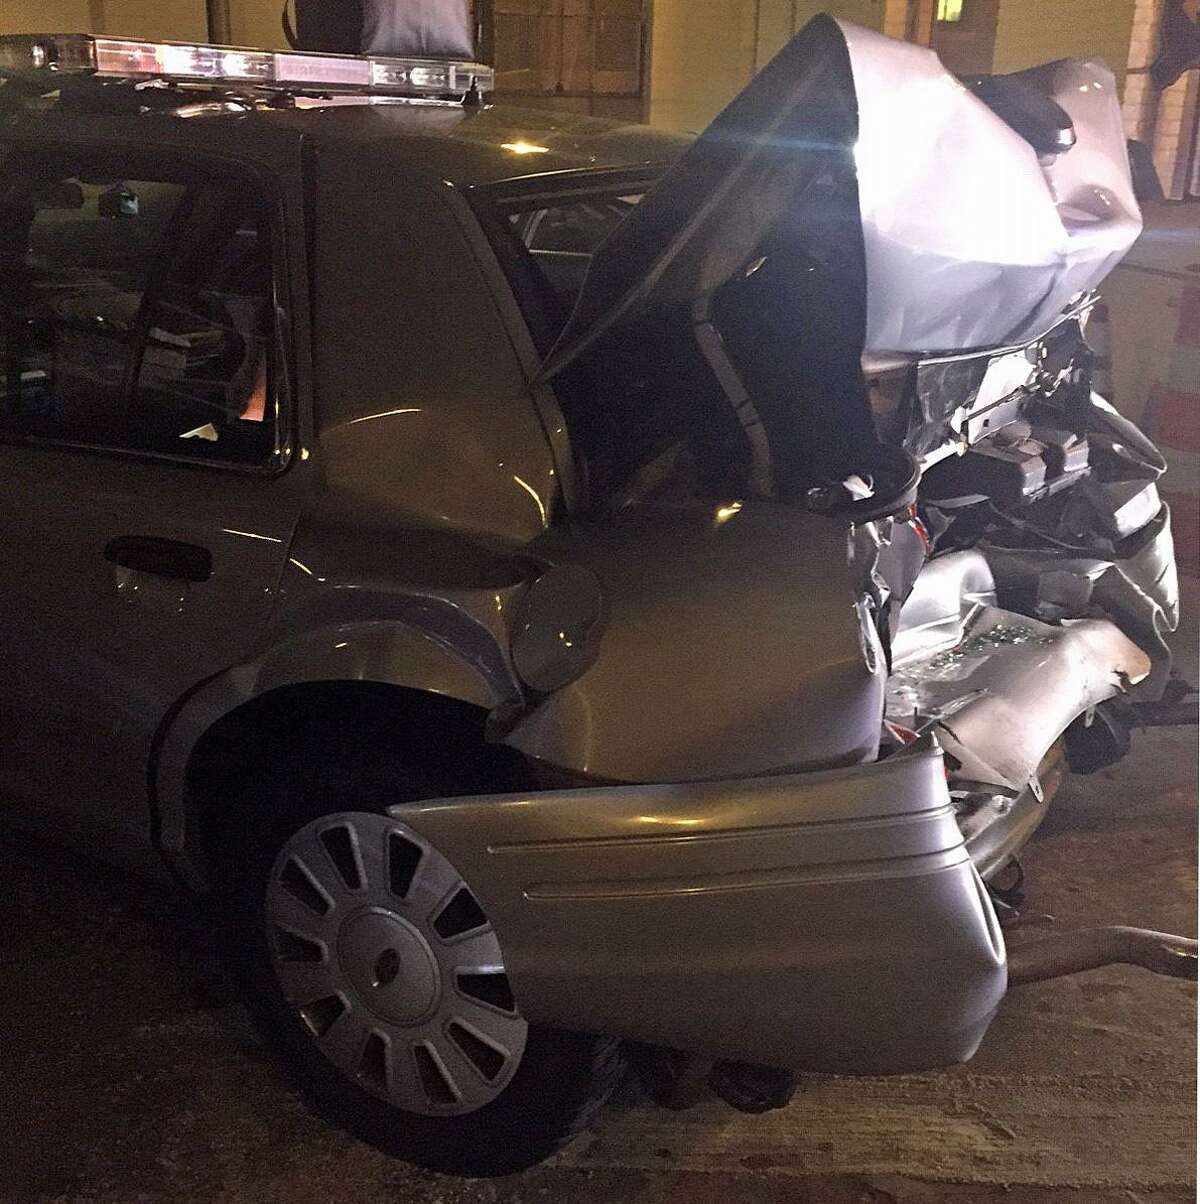 Connecticut State Police Trooper Garreth Olliviere’s cruiser was rear-ended by a drunk driver on I-91 in Middletown on July 18, 2016. The trooper and the drunk driver received minor injuries. The driver, Joshua Rita, 25, of Meriden, was arrested on Dec. 14, 2016.